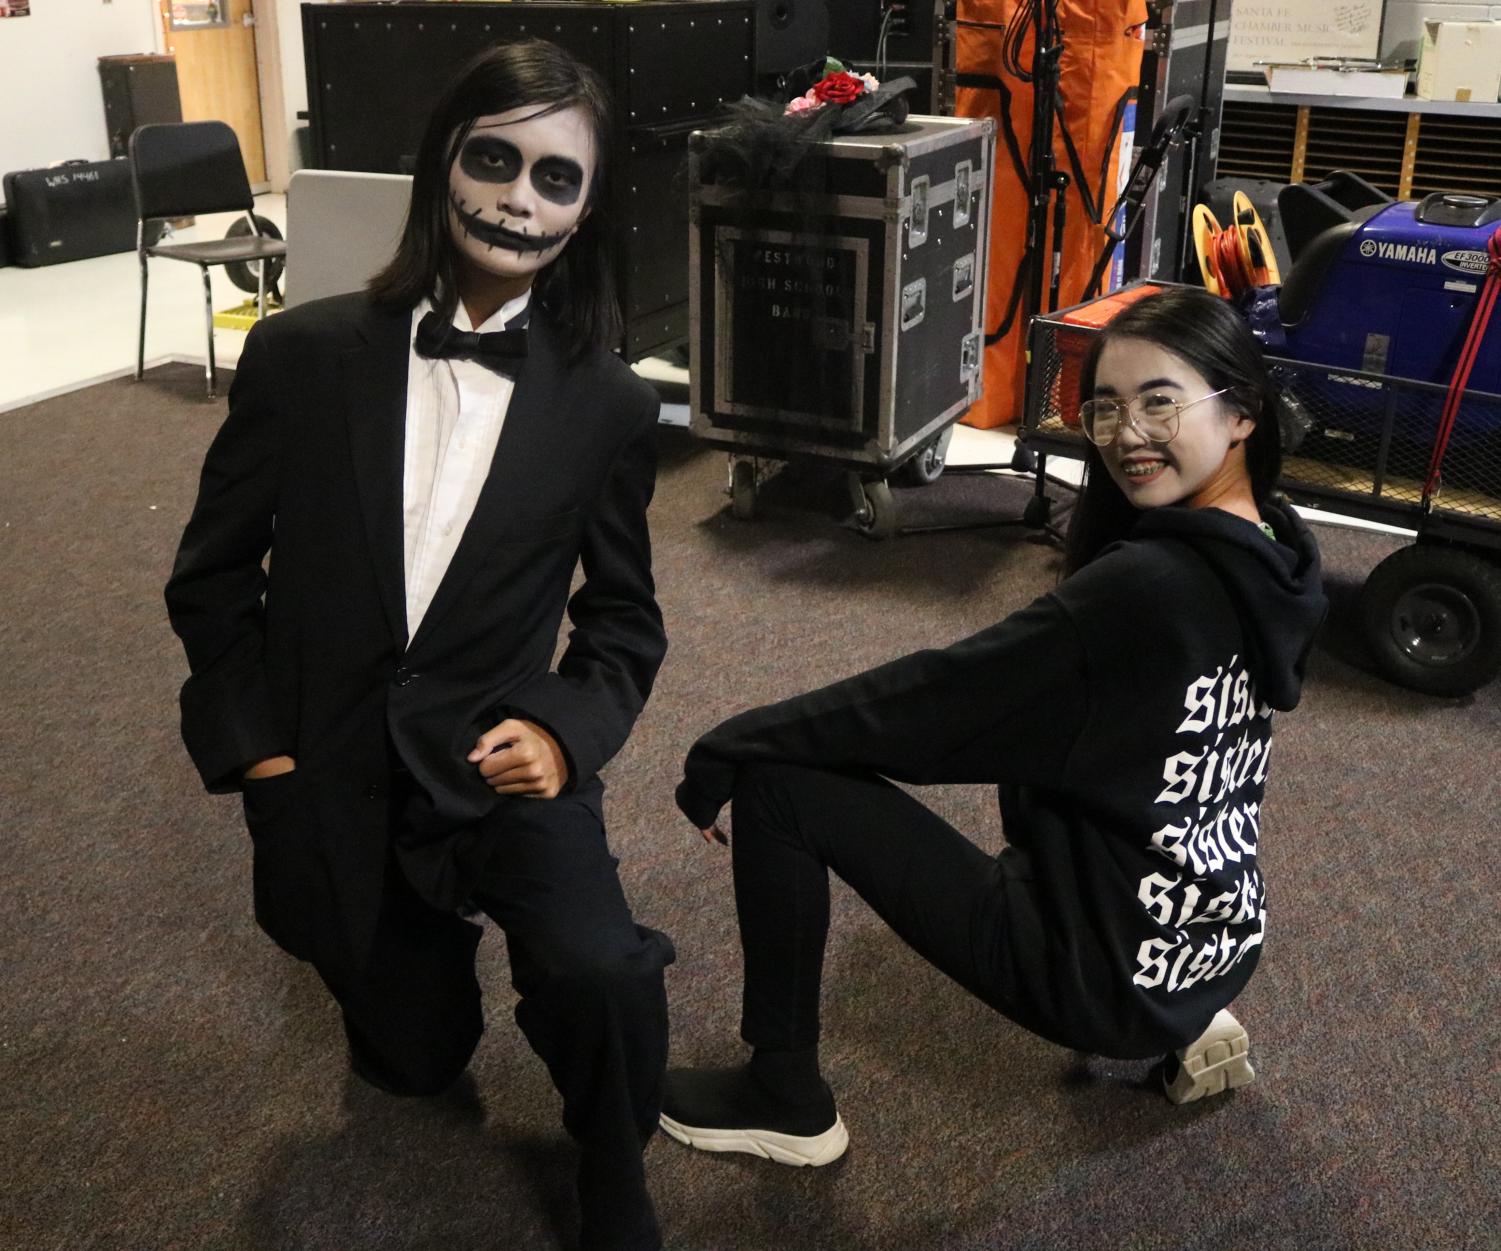 Band+Celebrates+Halloween+with+Spooky+Festivities